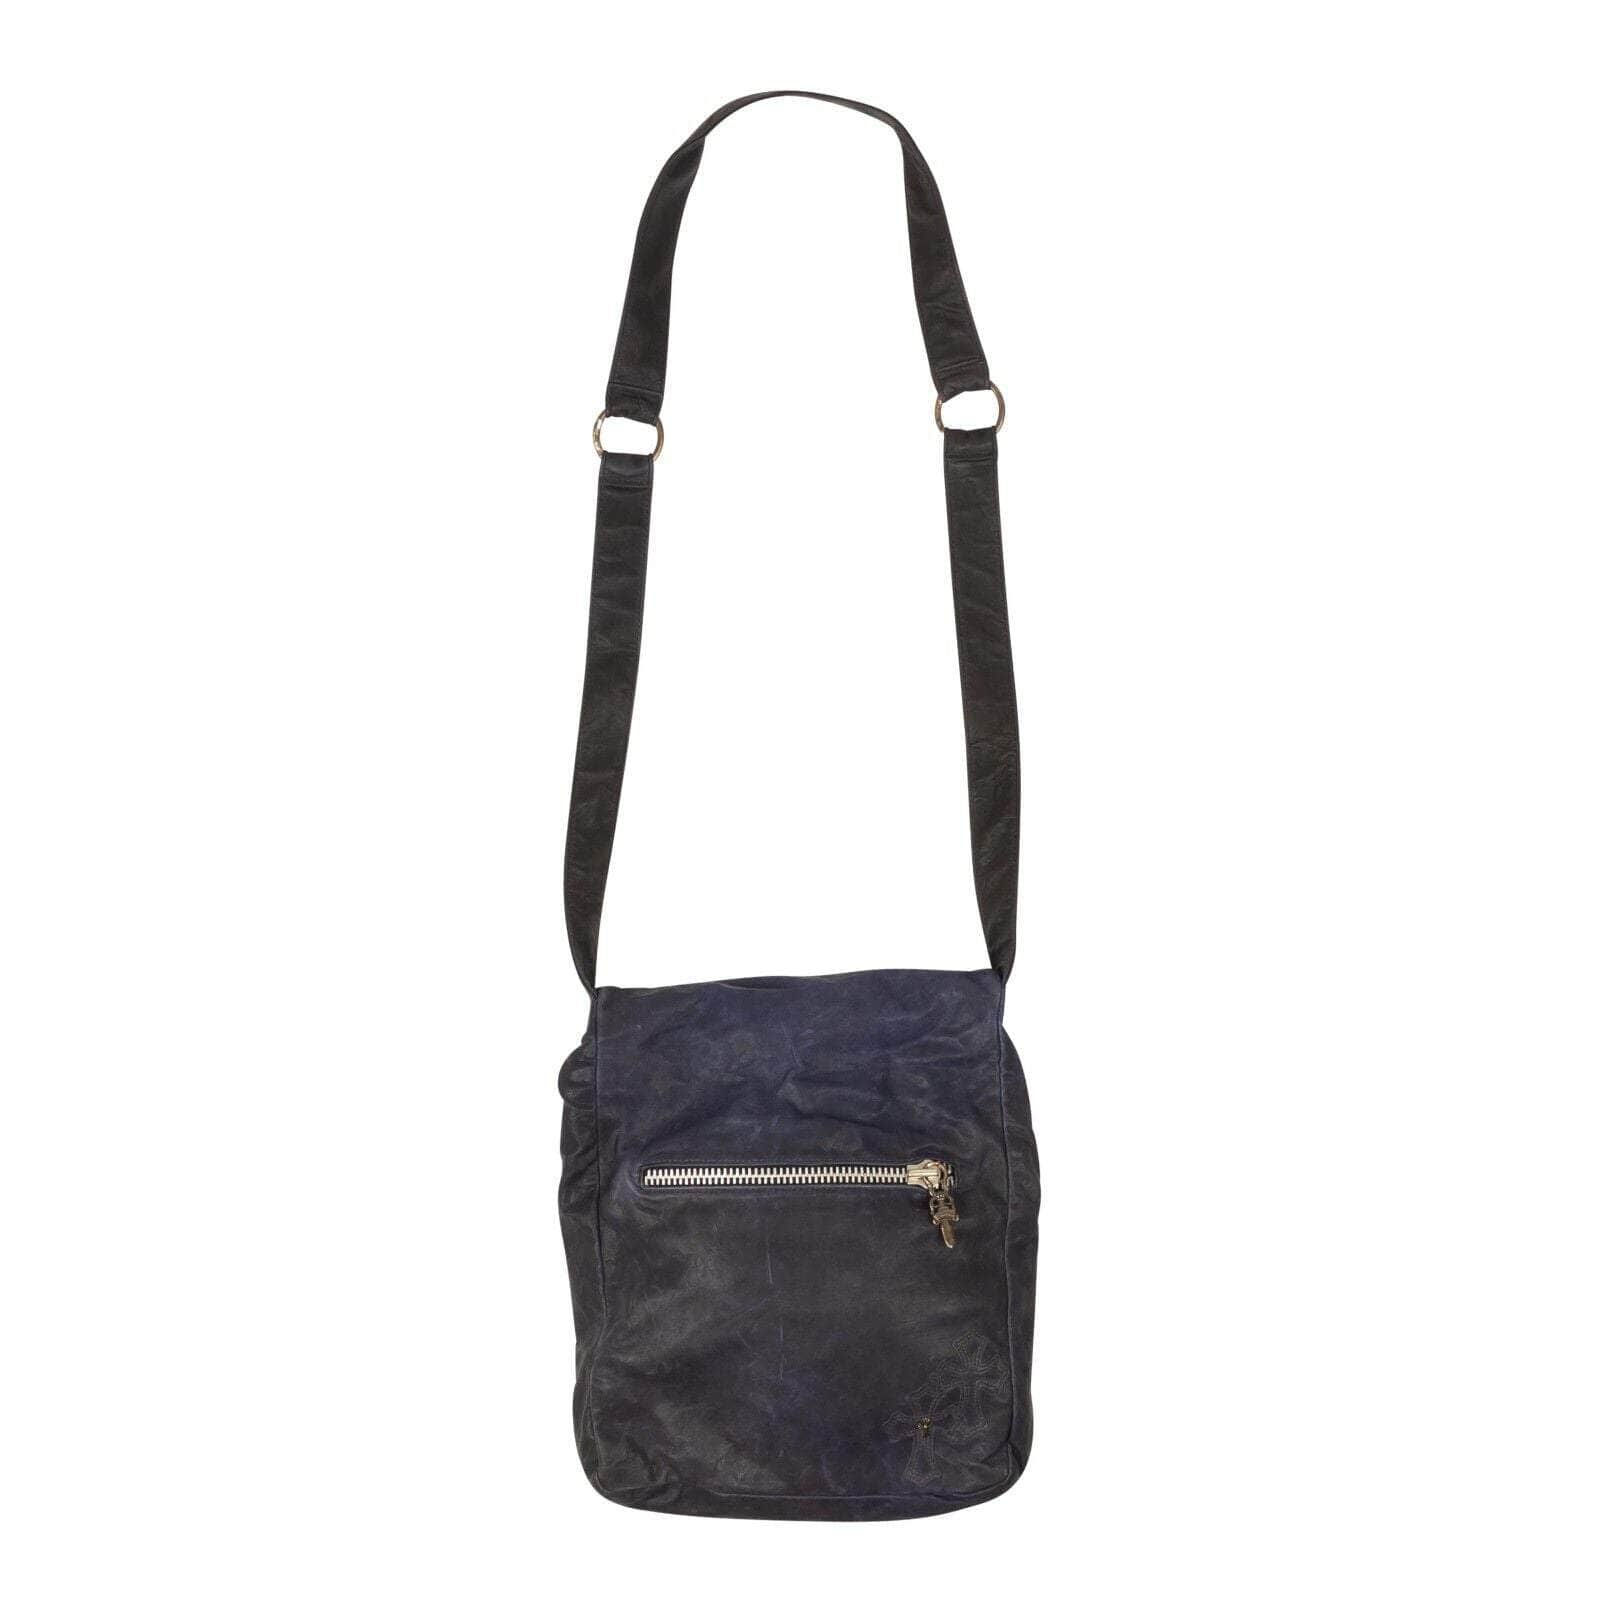 CHROME HEARTS channelenable-all, chicmi, chrome-hearts, couponcollection, gender-mens, main-handbags, mens-messenger-bags, mens-shoes, over-5000, size-os OS Navy Blue Leather Messenger Bag 95-CRH-3004/OS 95-CRH-3004/OS